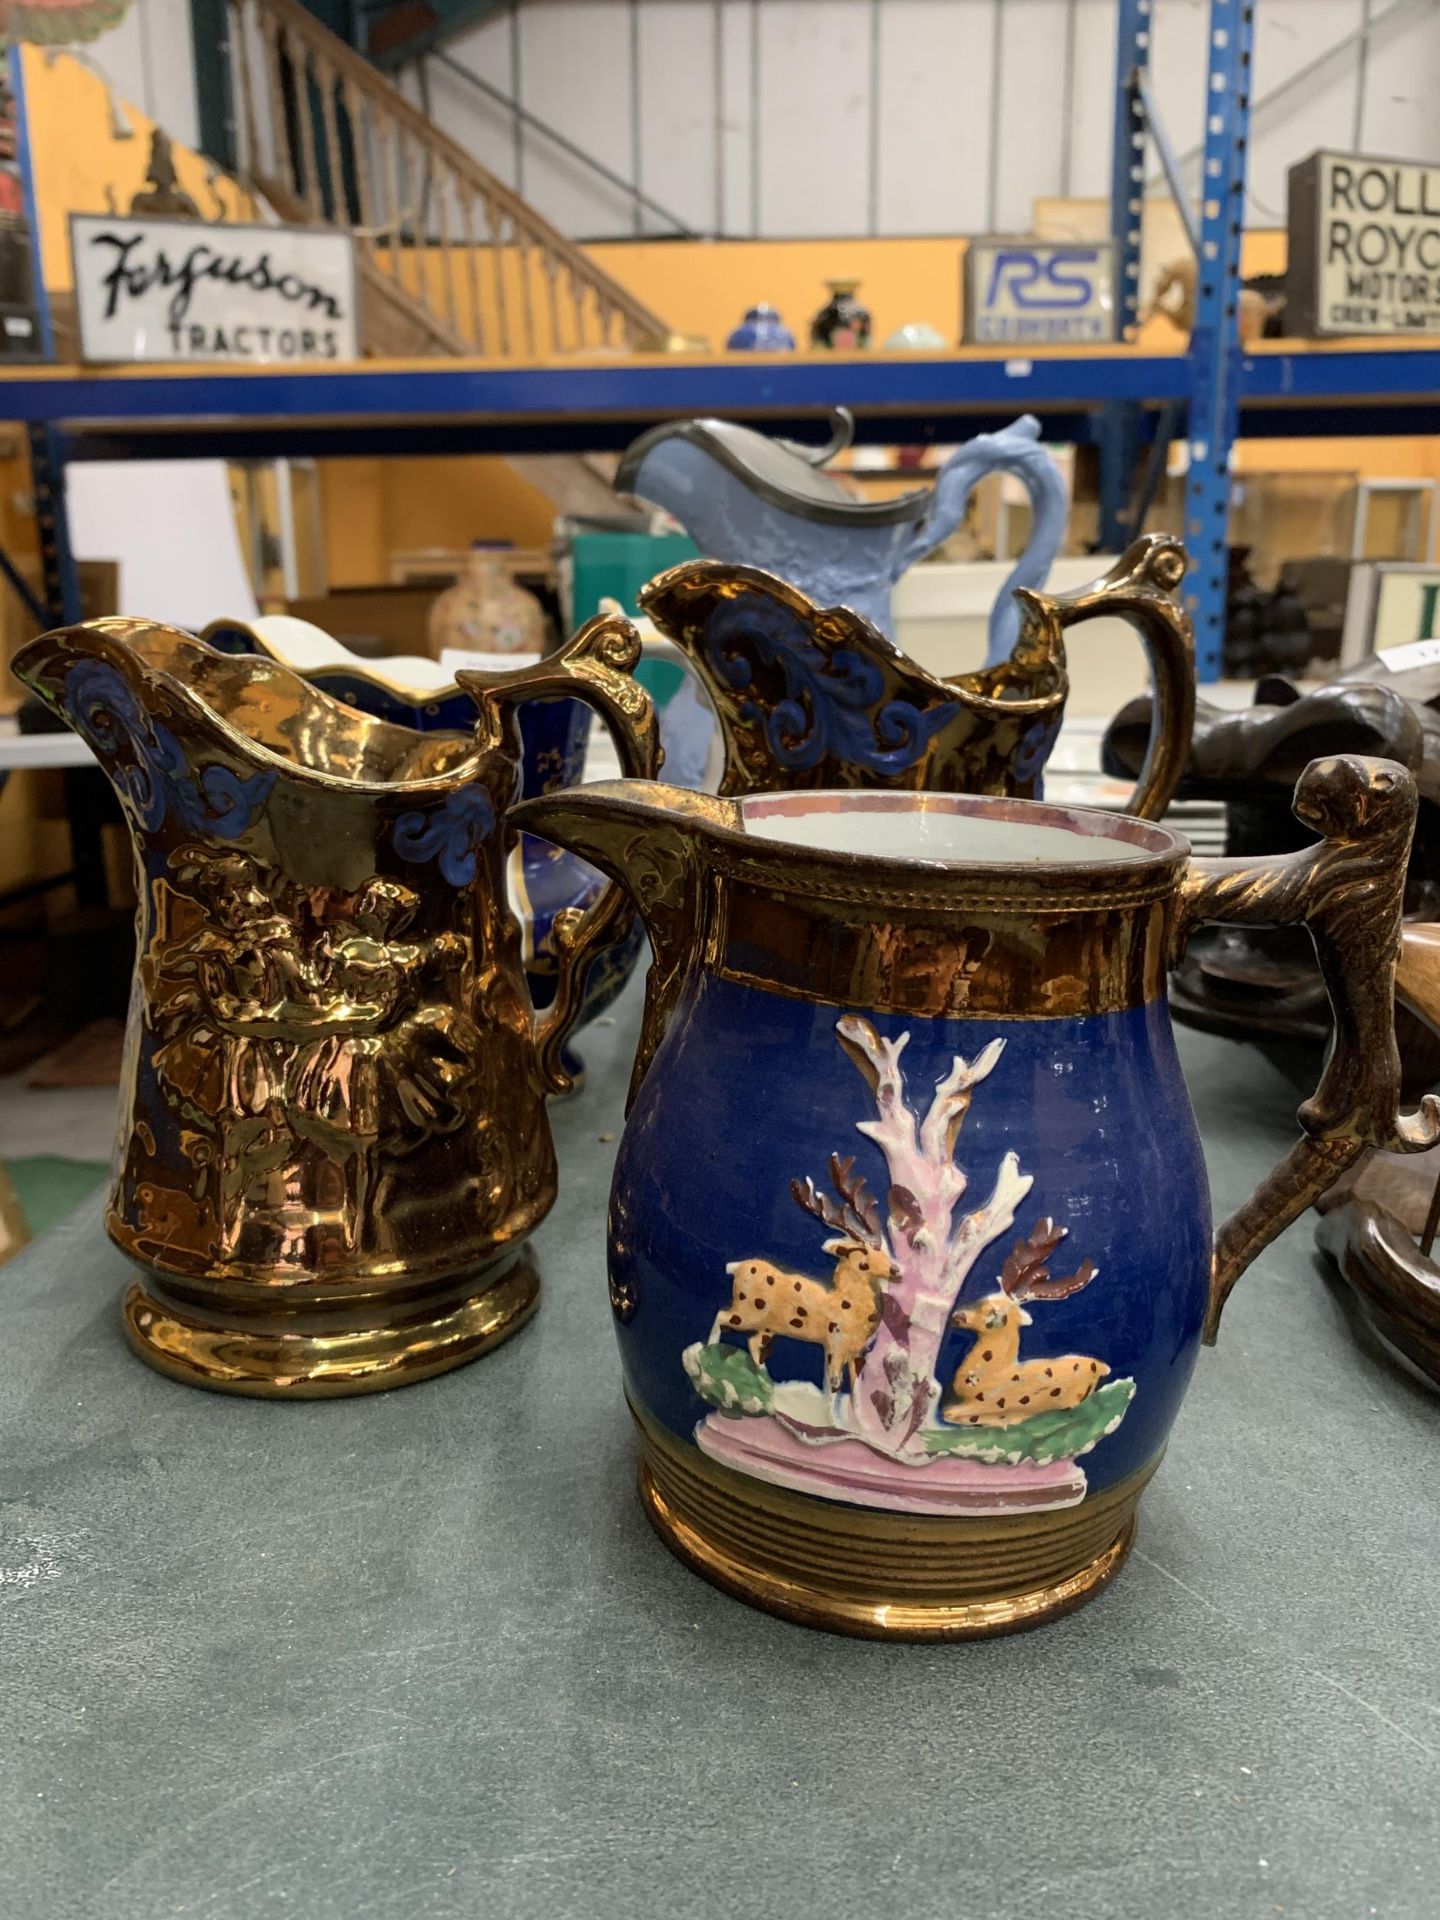 SIX VINTAGE JUGS, A GOBLET AND A MUG TO INCLUDE A WATER JUG WITH CHERUBS AND PEWTER LID, COPPER - Image 3 of 5